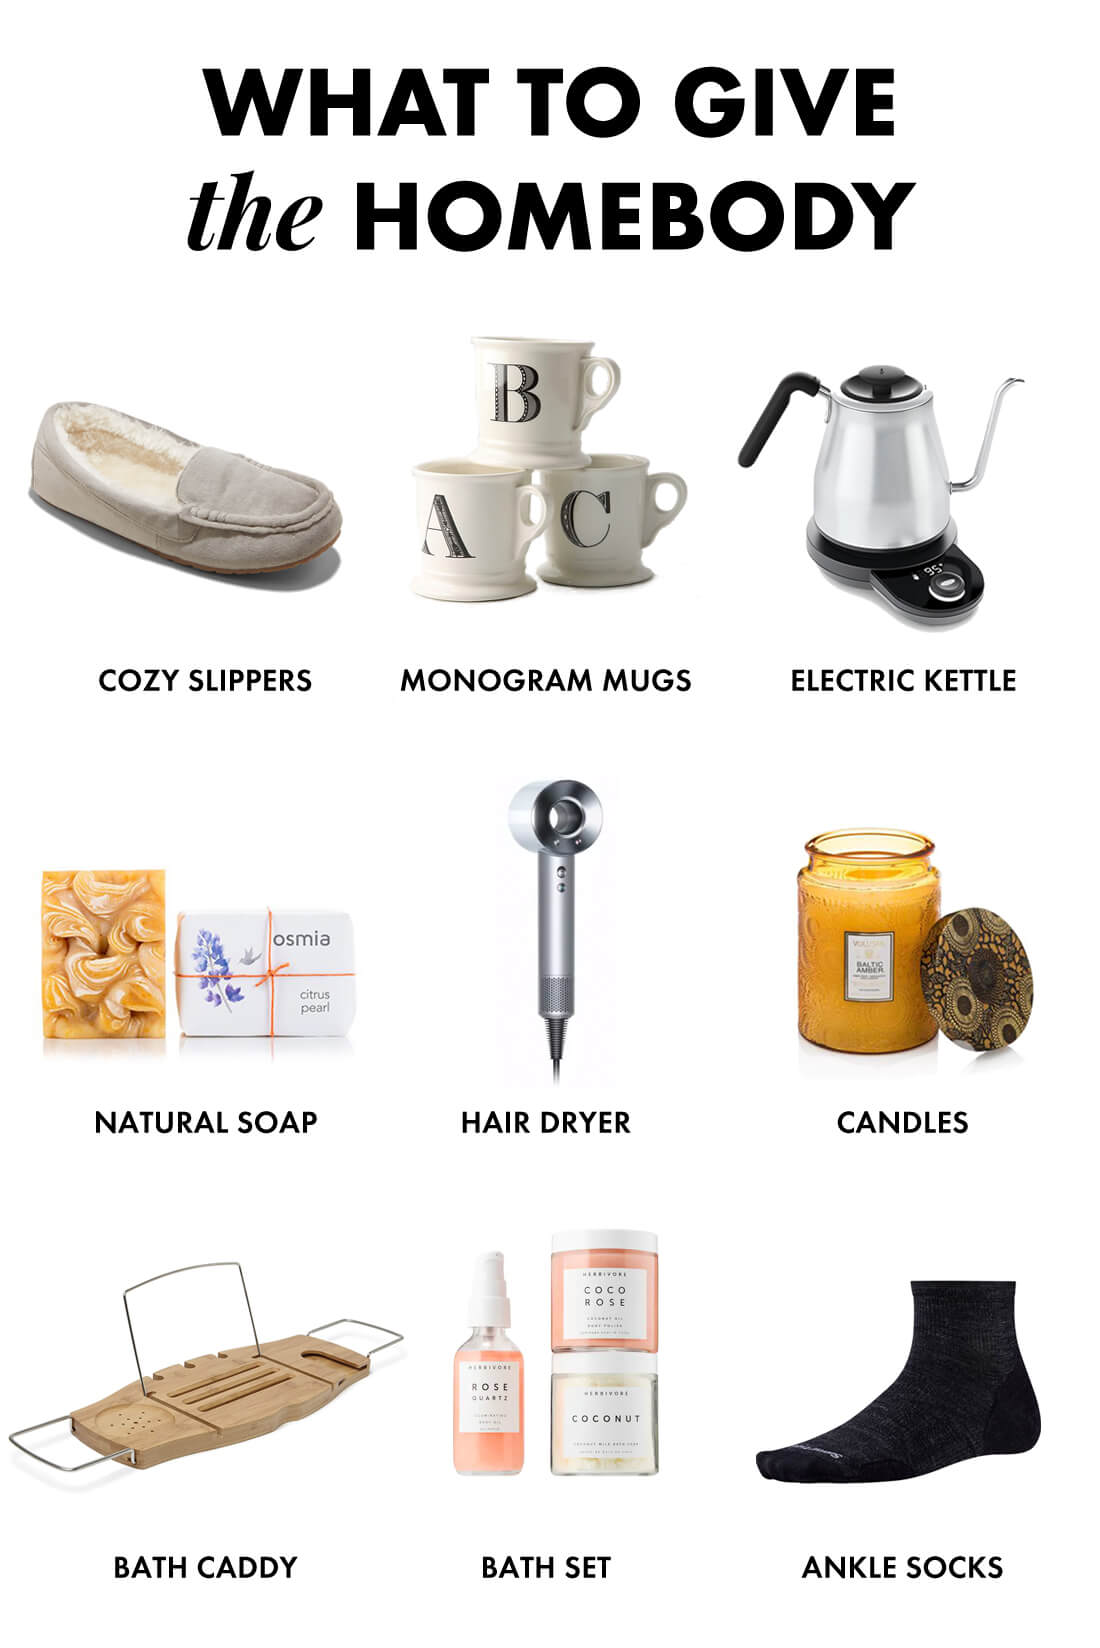 gifts for the homebody